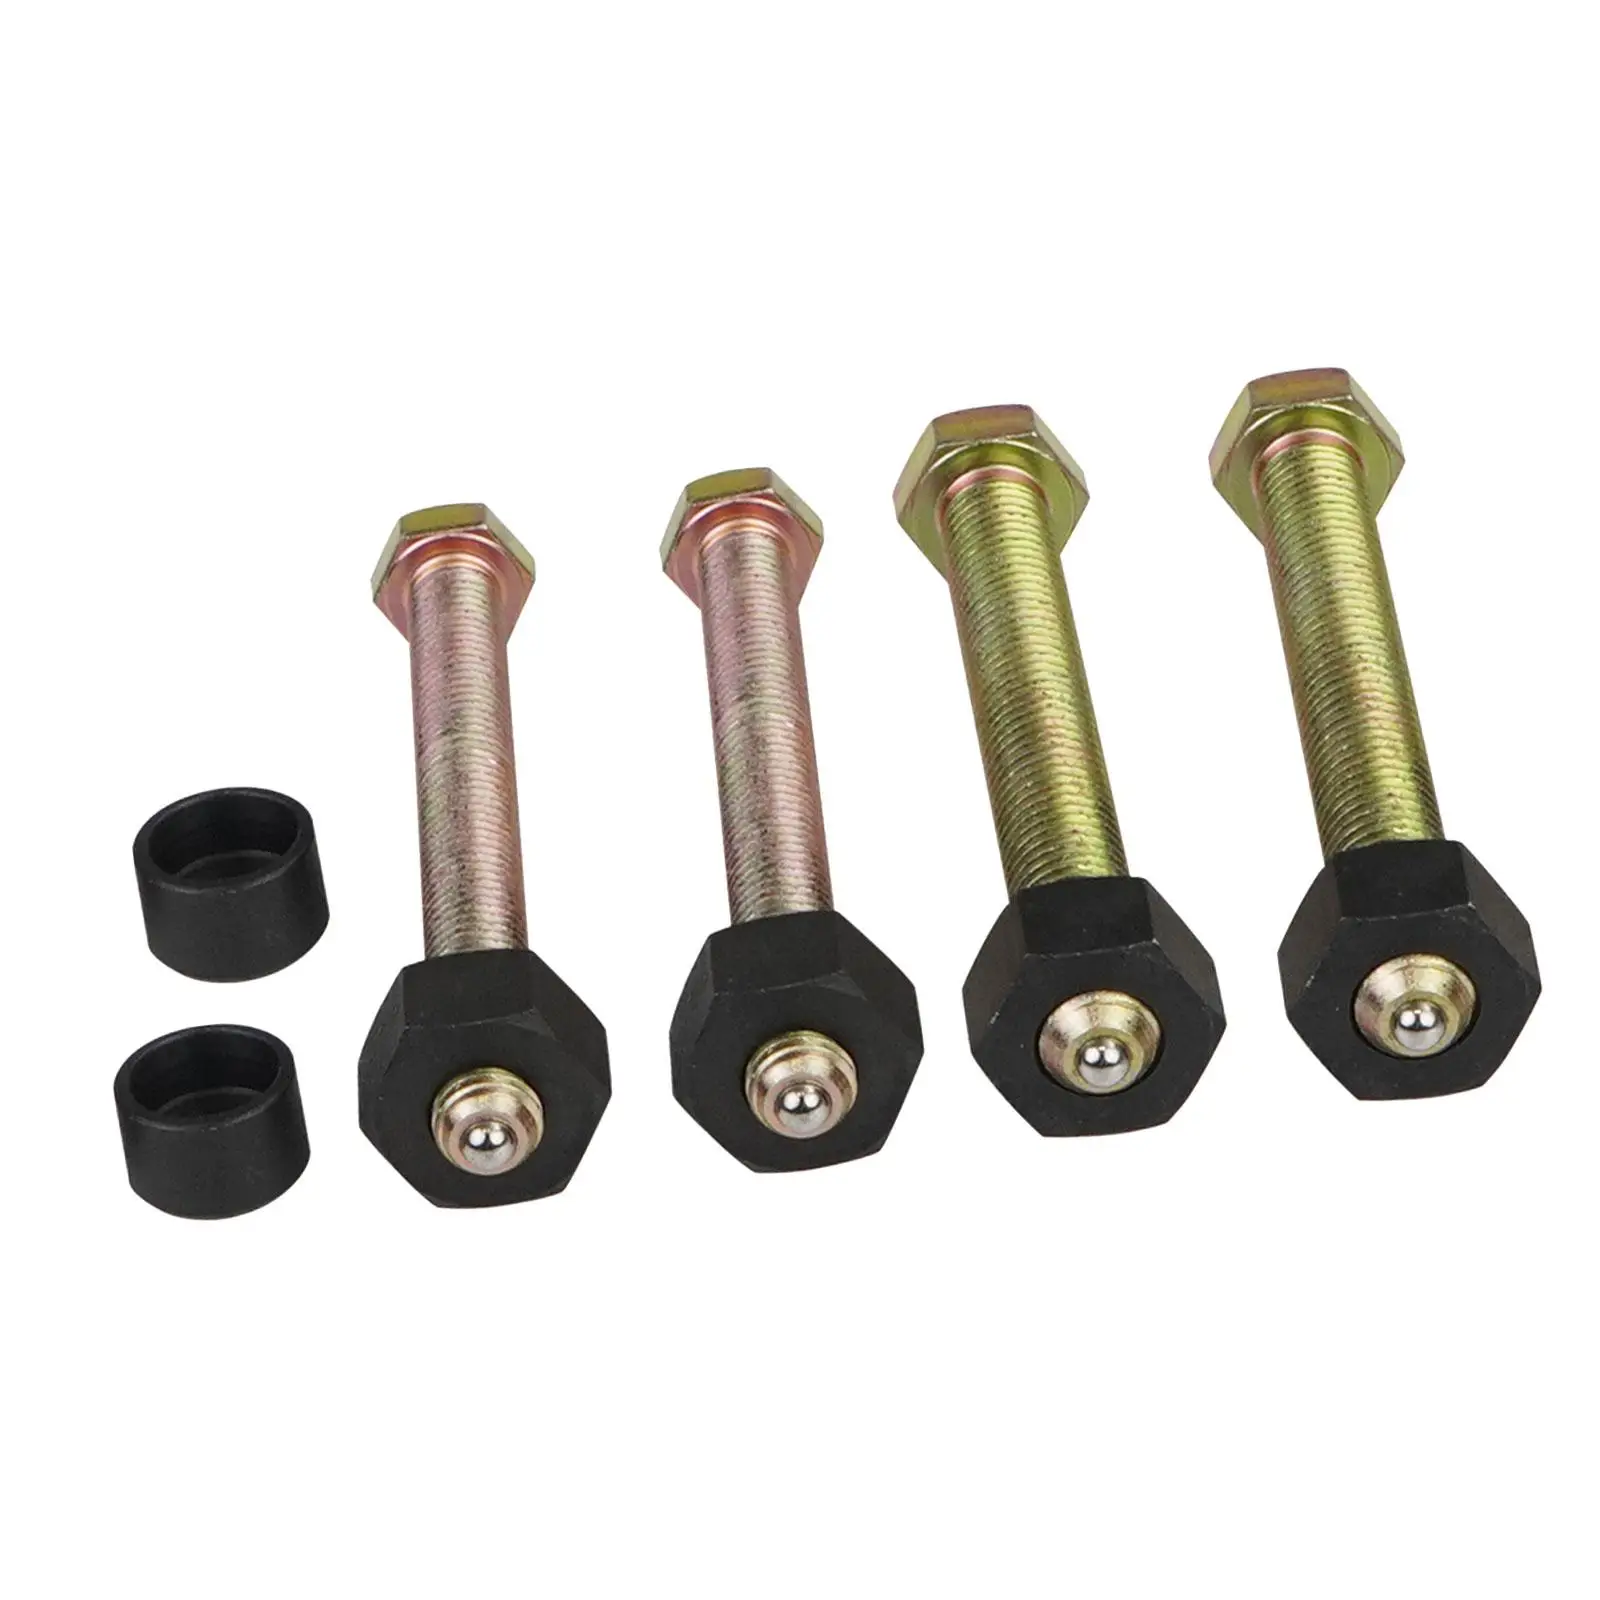 78834 Impact Rated Hub Removal Bolt Set Easy to Install Metal Replaces Bolts Spare Parts Accessories Pneumatic Tools Durable